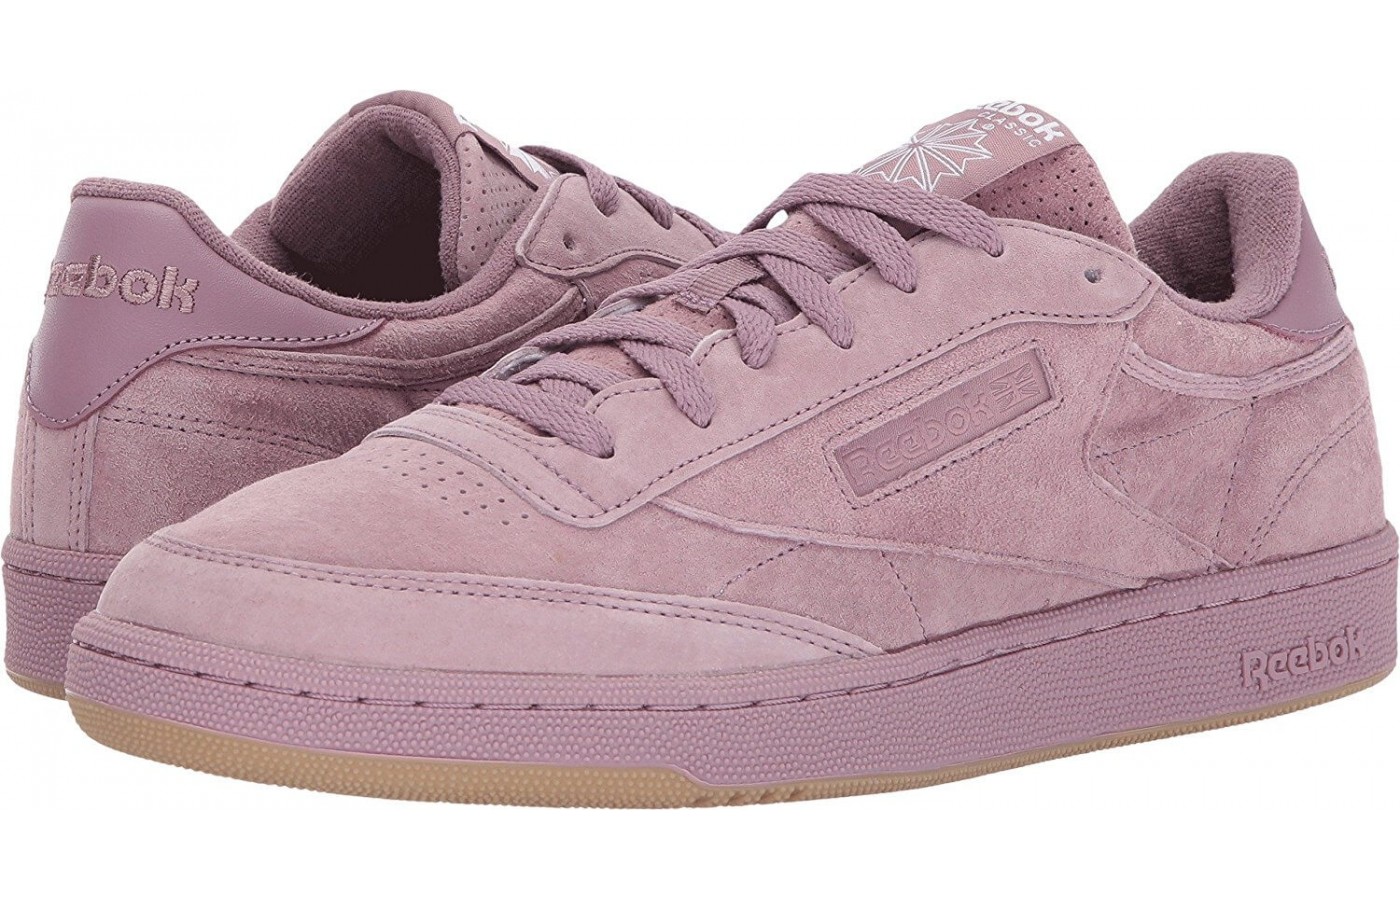 The Reebok Club C 85 in a light pink colorway